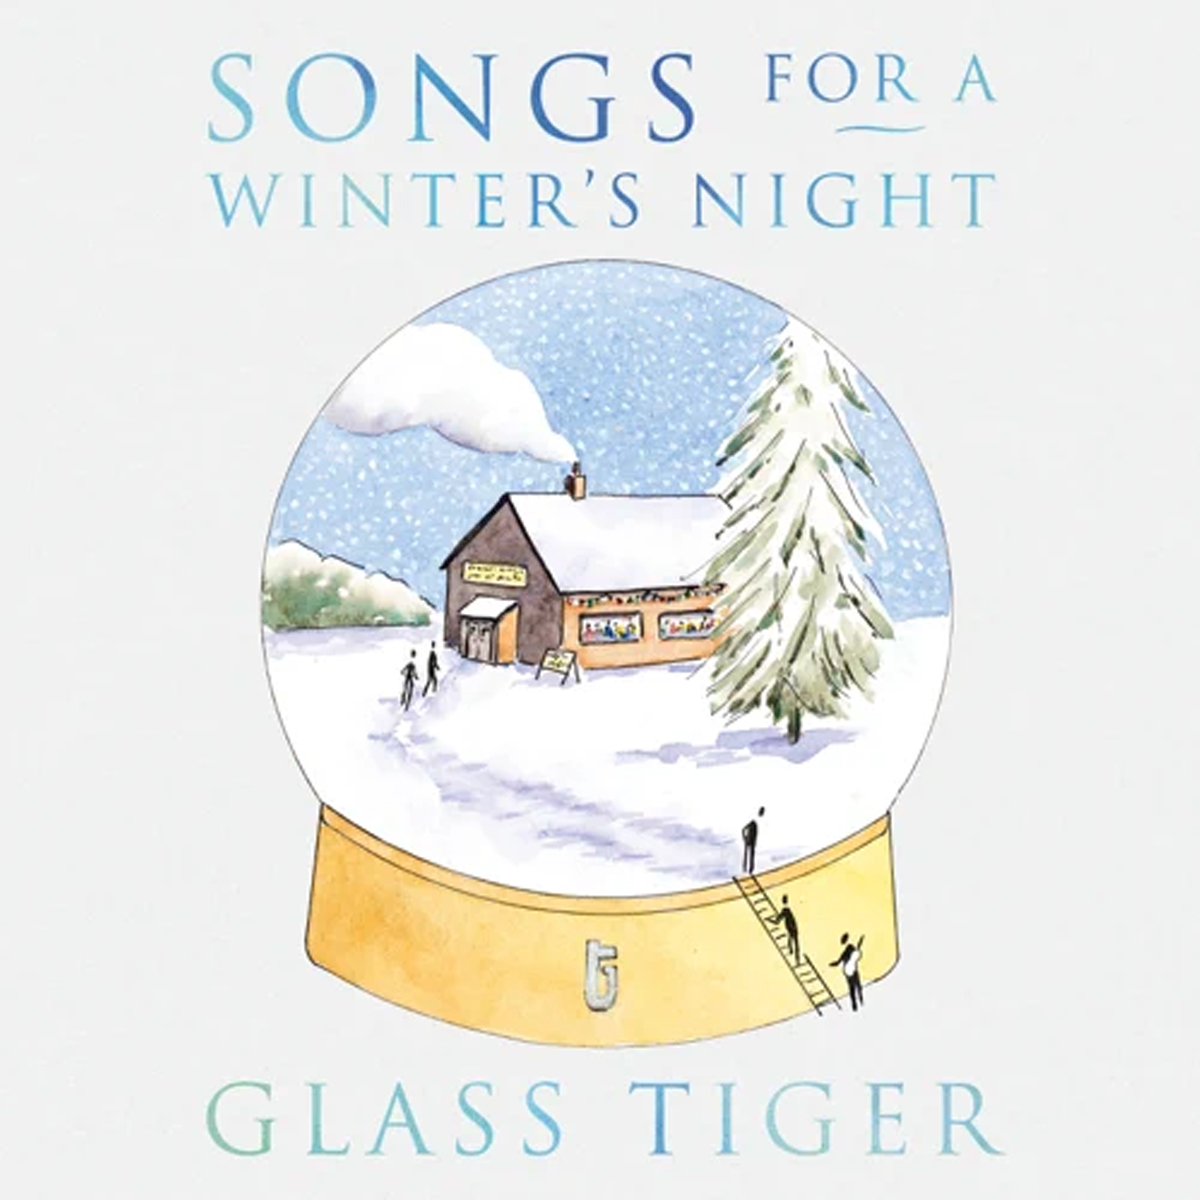 Glass Tiger Releases Holiday Album With A Pop Twist – All Original Material Features All-Star Cast